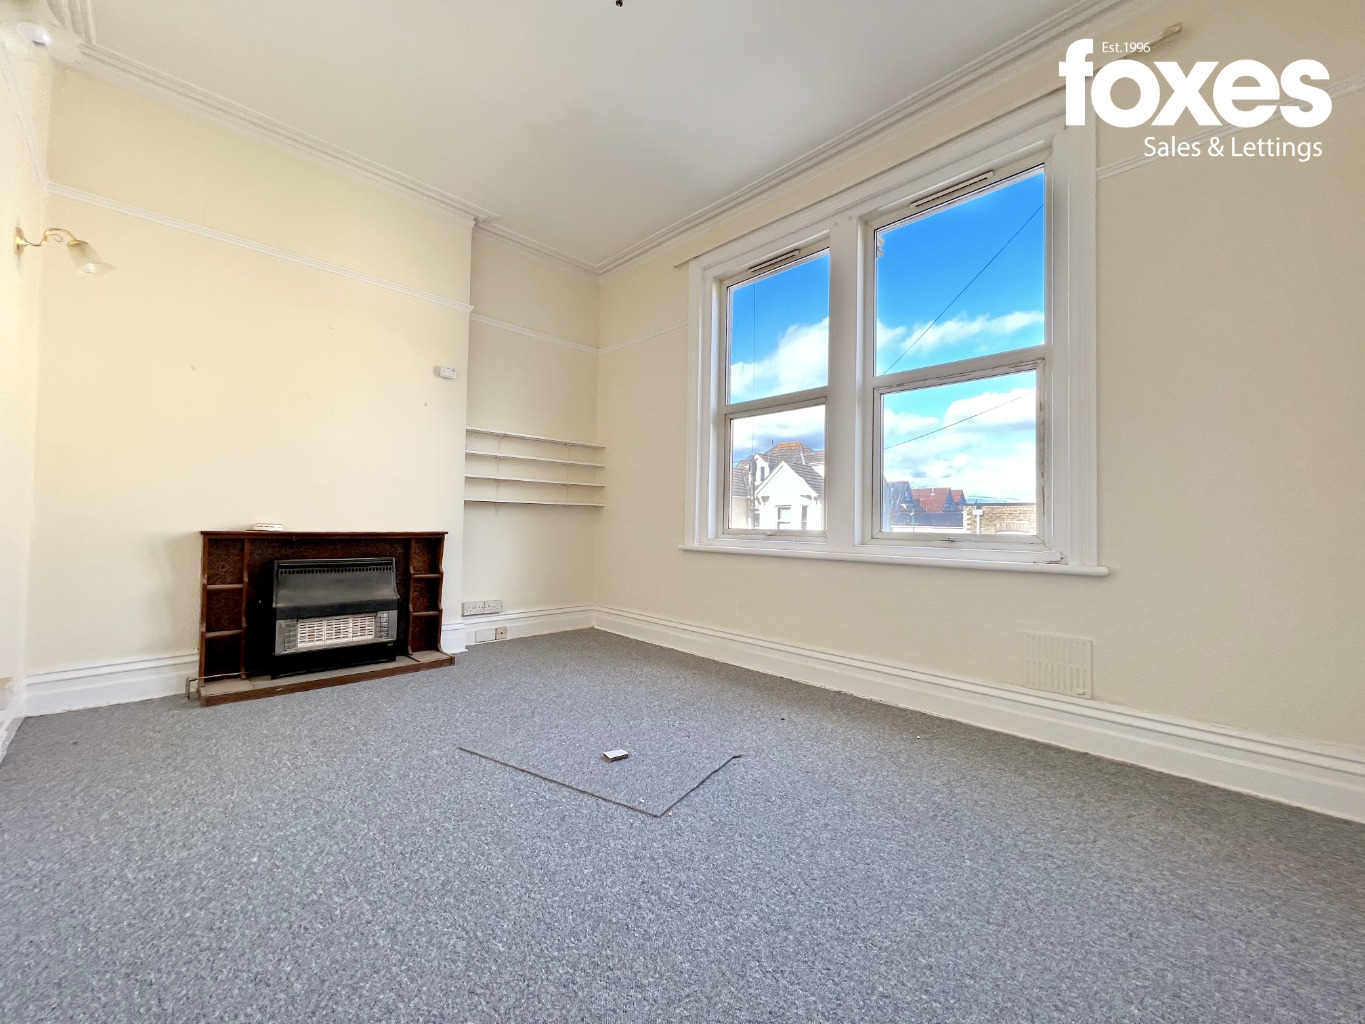 1 bed flat to rent in The Crescent, Bournemouth - Property Image 1